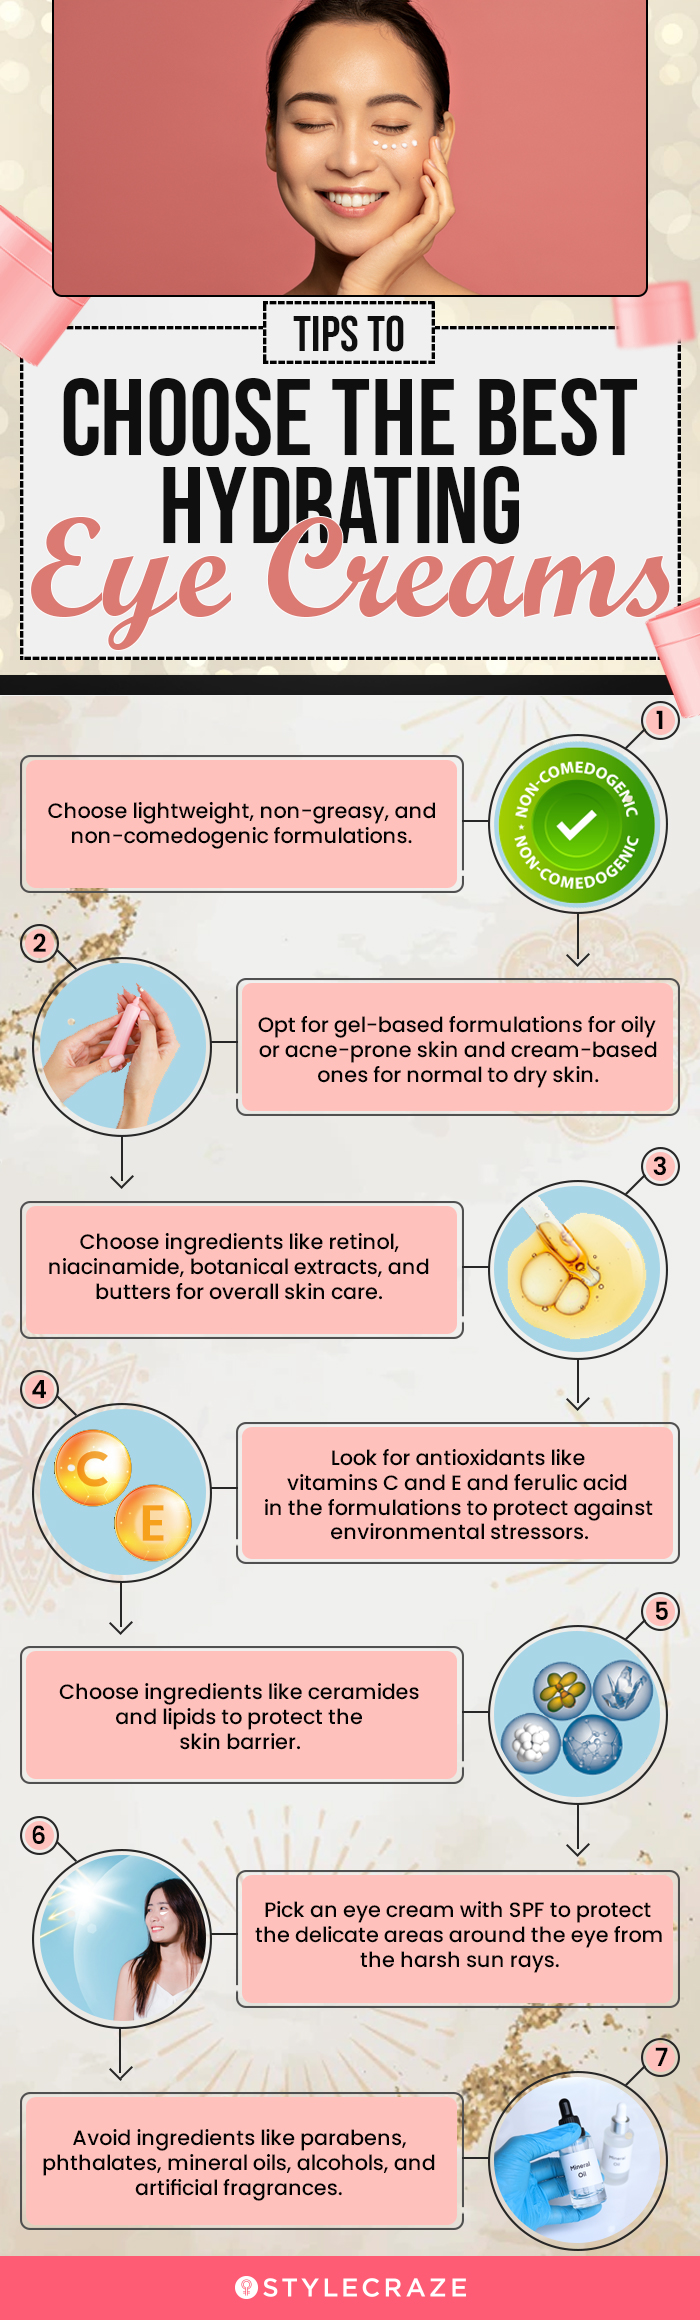 Tips To Choose The Best Hydrating Eye Creams  [infographic]